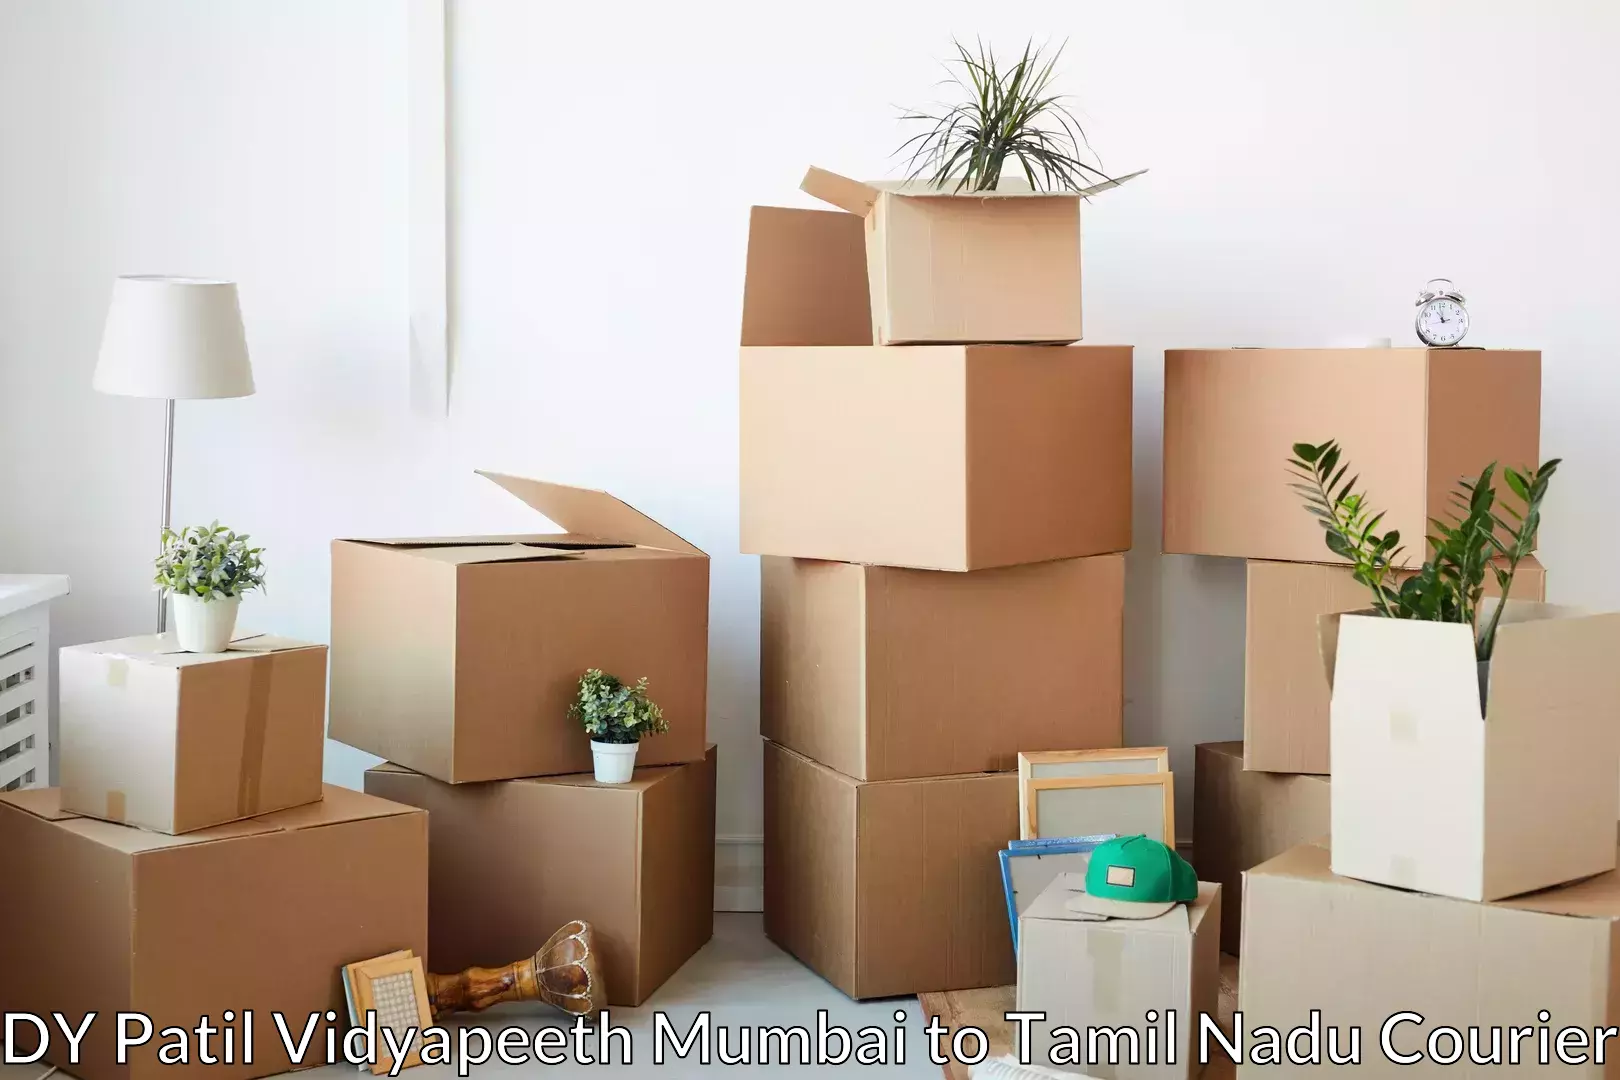 Professional movers and packers DY Patil Vidyapeeth Mumbai to Tuticorin Port